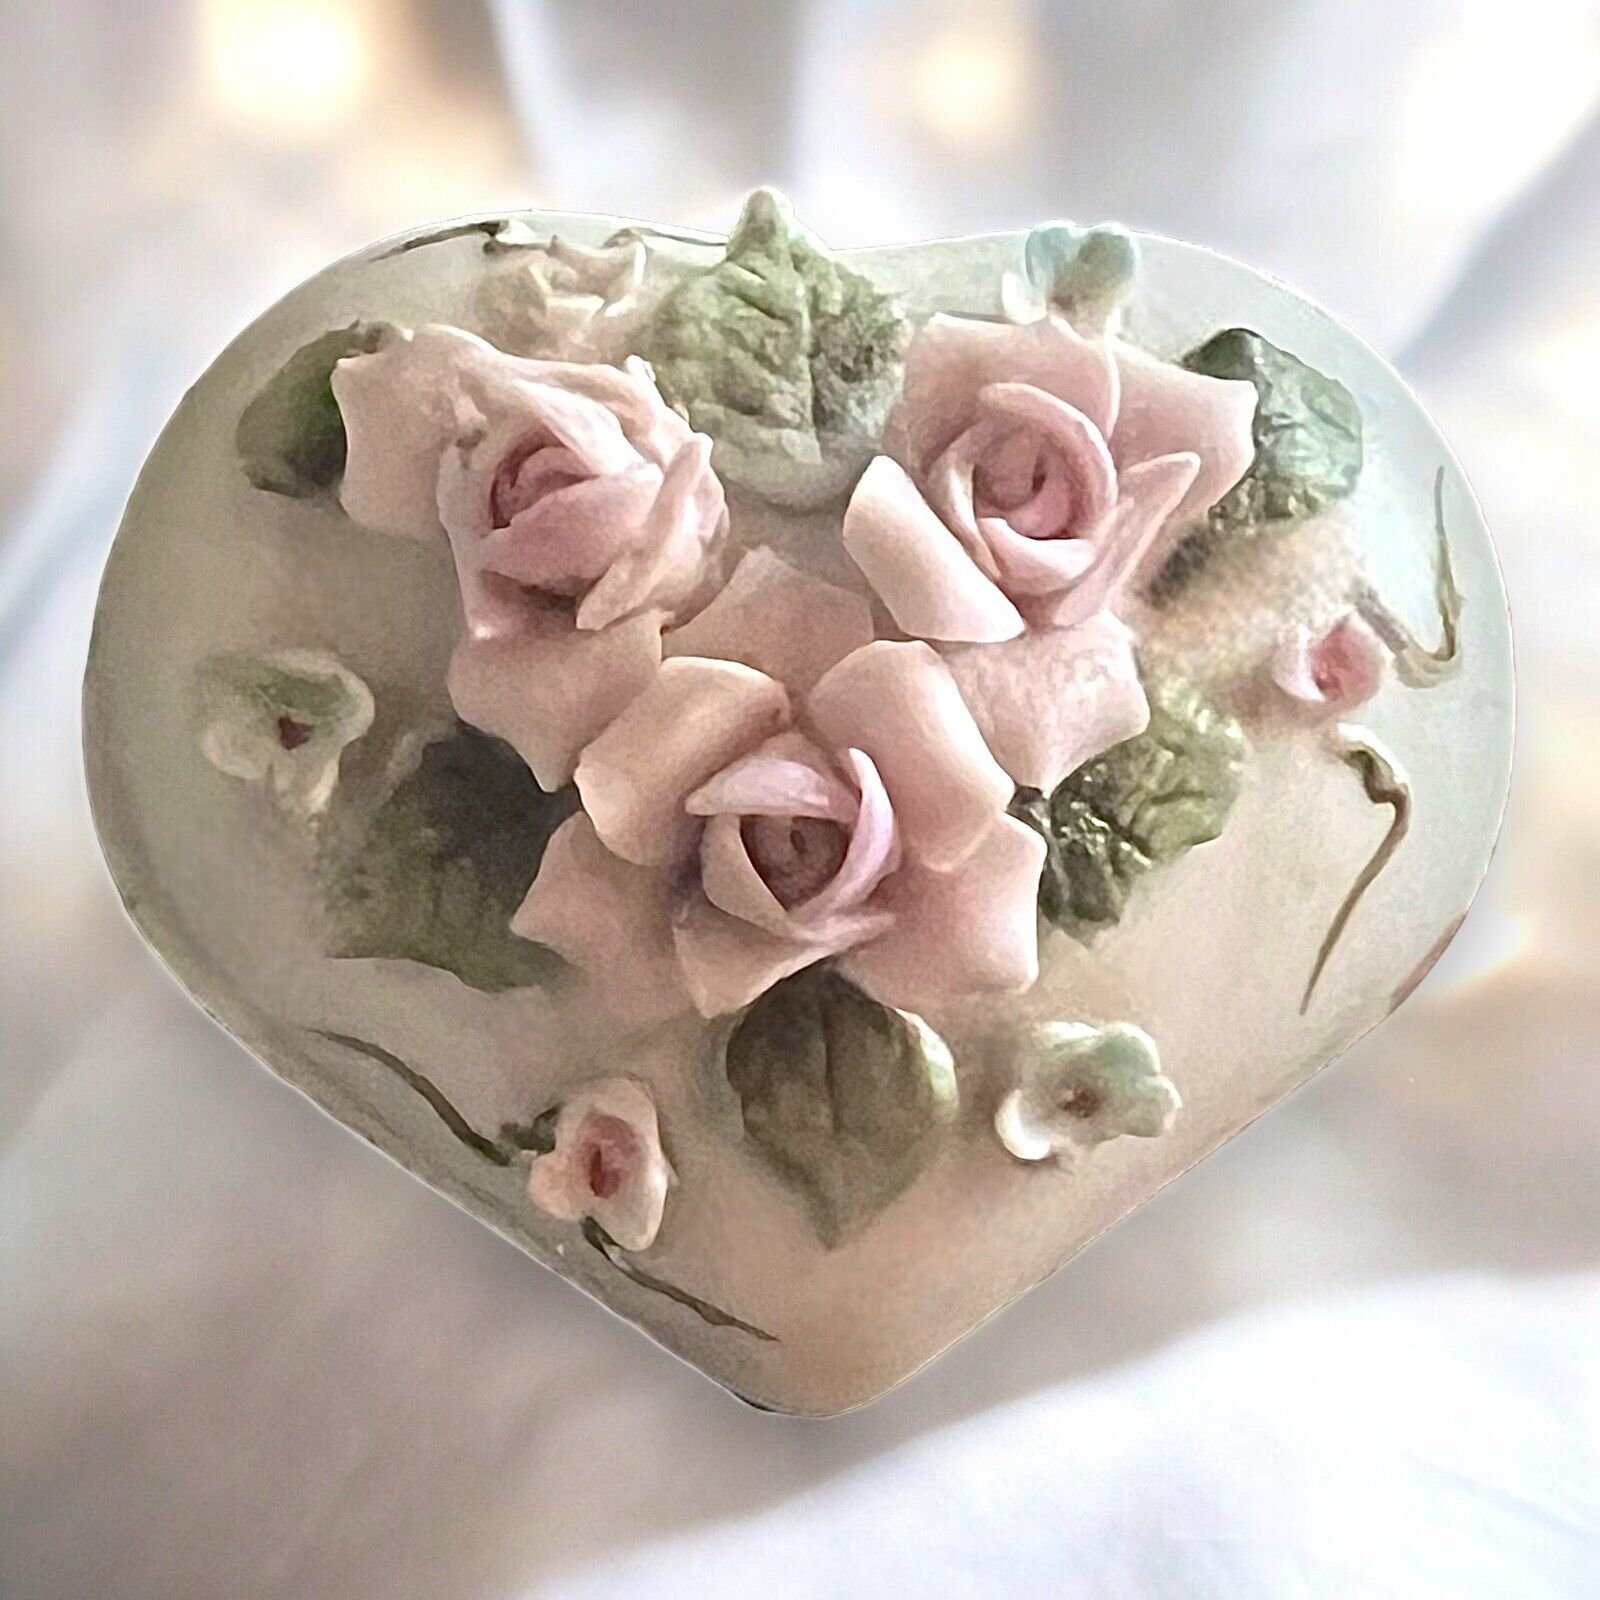 Vintage Lefton Heart-Shaped Trinket Box with Pink Roses, Footed, 2.5”